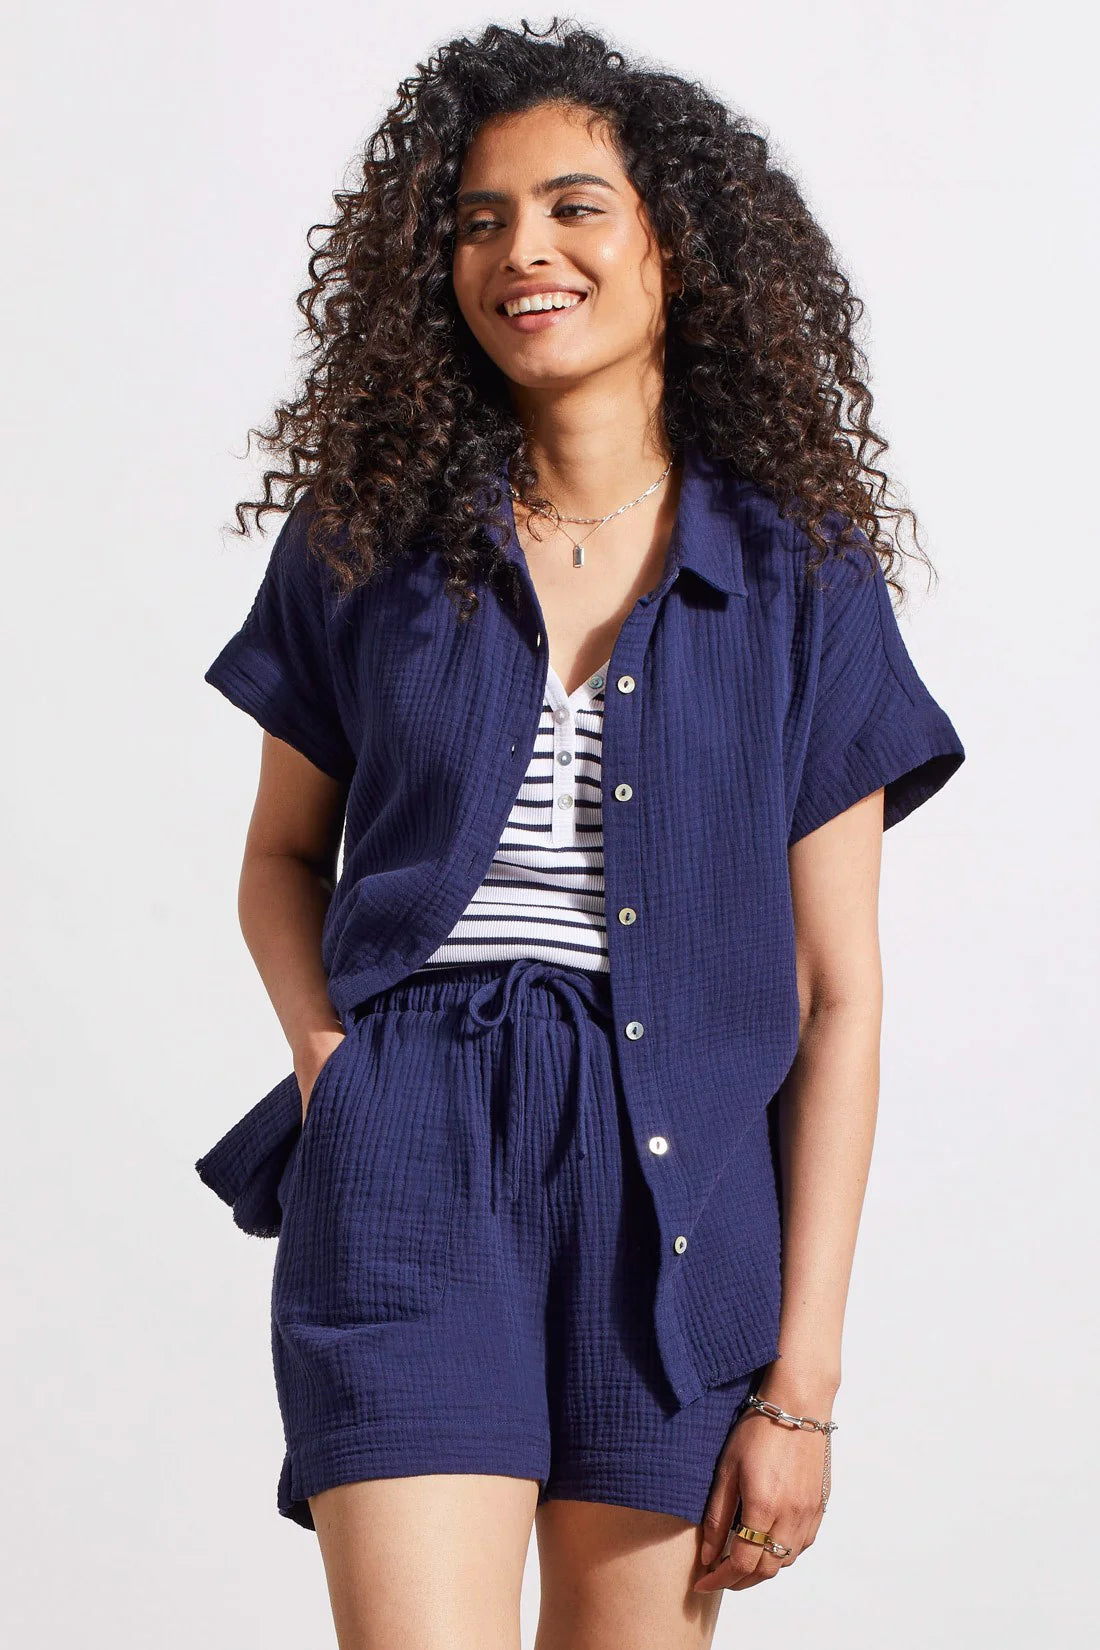 Rocking a classic button-up front, collared neckline, and short sleeves, this shirt brings refined style to warm days. We love the airy dolman design, rolled cuffs, raw-edge hem, and crinkled gauze cotton that stays lightweight from morning until night.